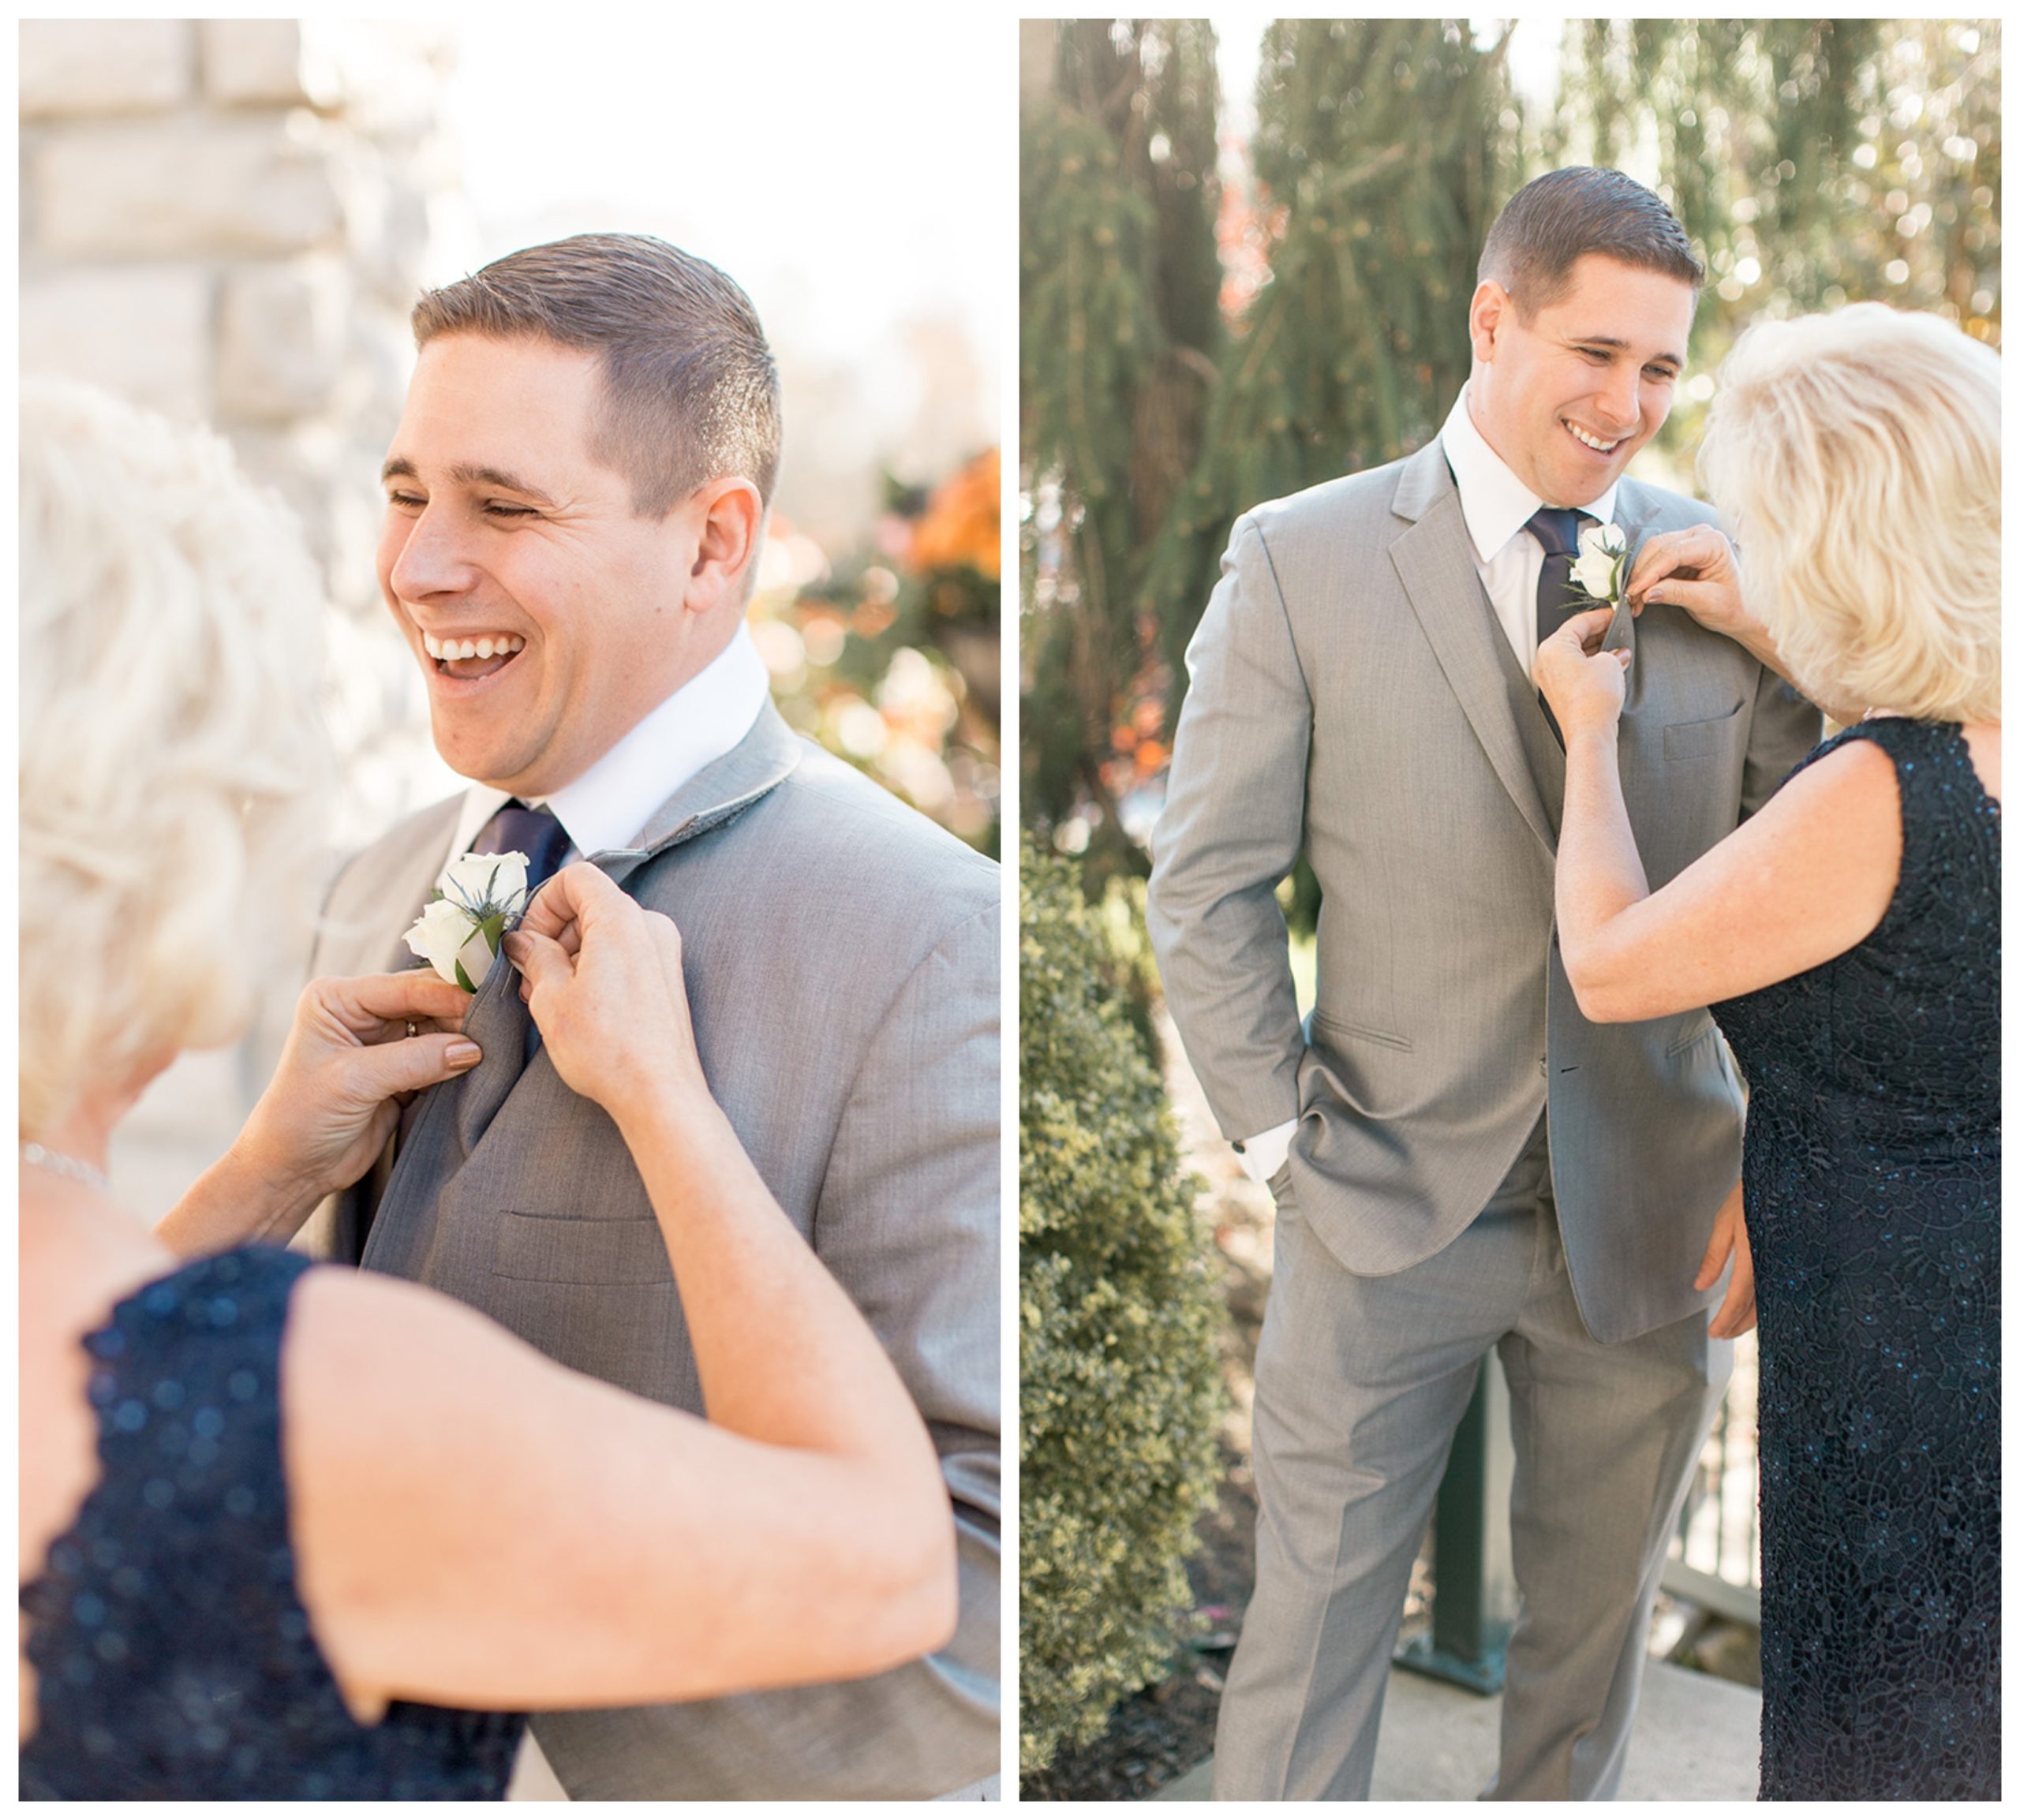 Mother of the groom helping him with his boutonnière 